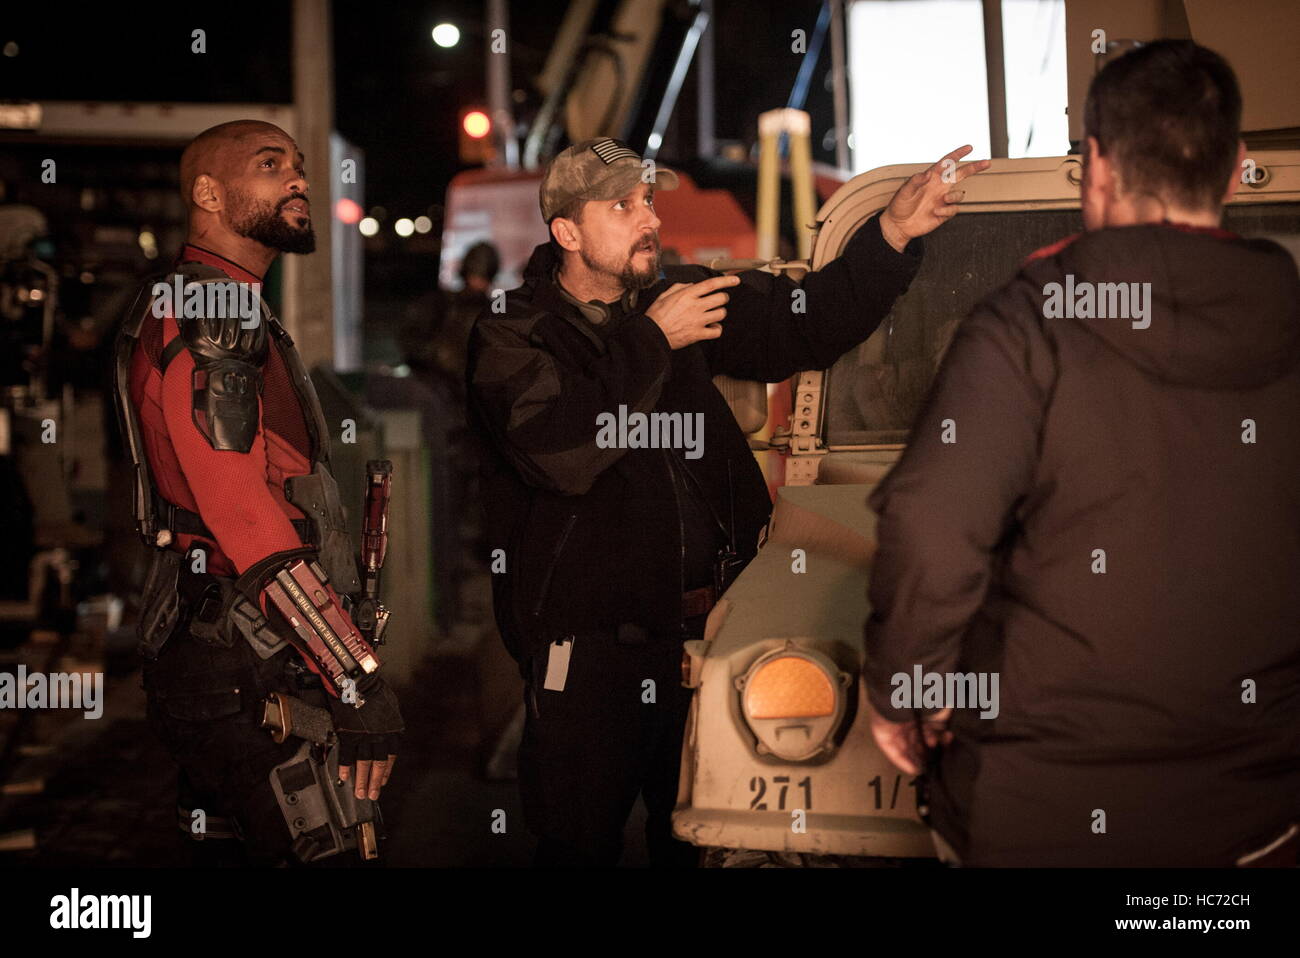 RELEASE DATE: August 5, 2016 TITLE: Suicide Squad STUDIO: Atlas Entertainment DIRECTOR: David Ayer PLOT: A secret government agency recruits imprisoned supervillains to execute dangerous black ops missions in exchange for clemency STARRING: Will Smith as Deadshot, David Ayer on set (Credit Image: c Atlas Entertainment/Entertainment Pictures/) Stock Photo